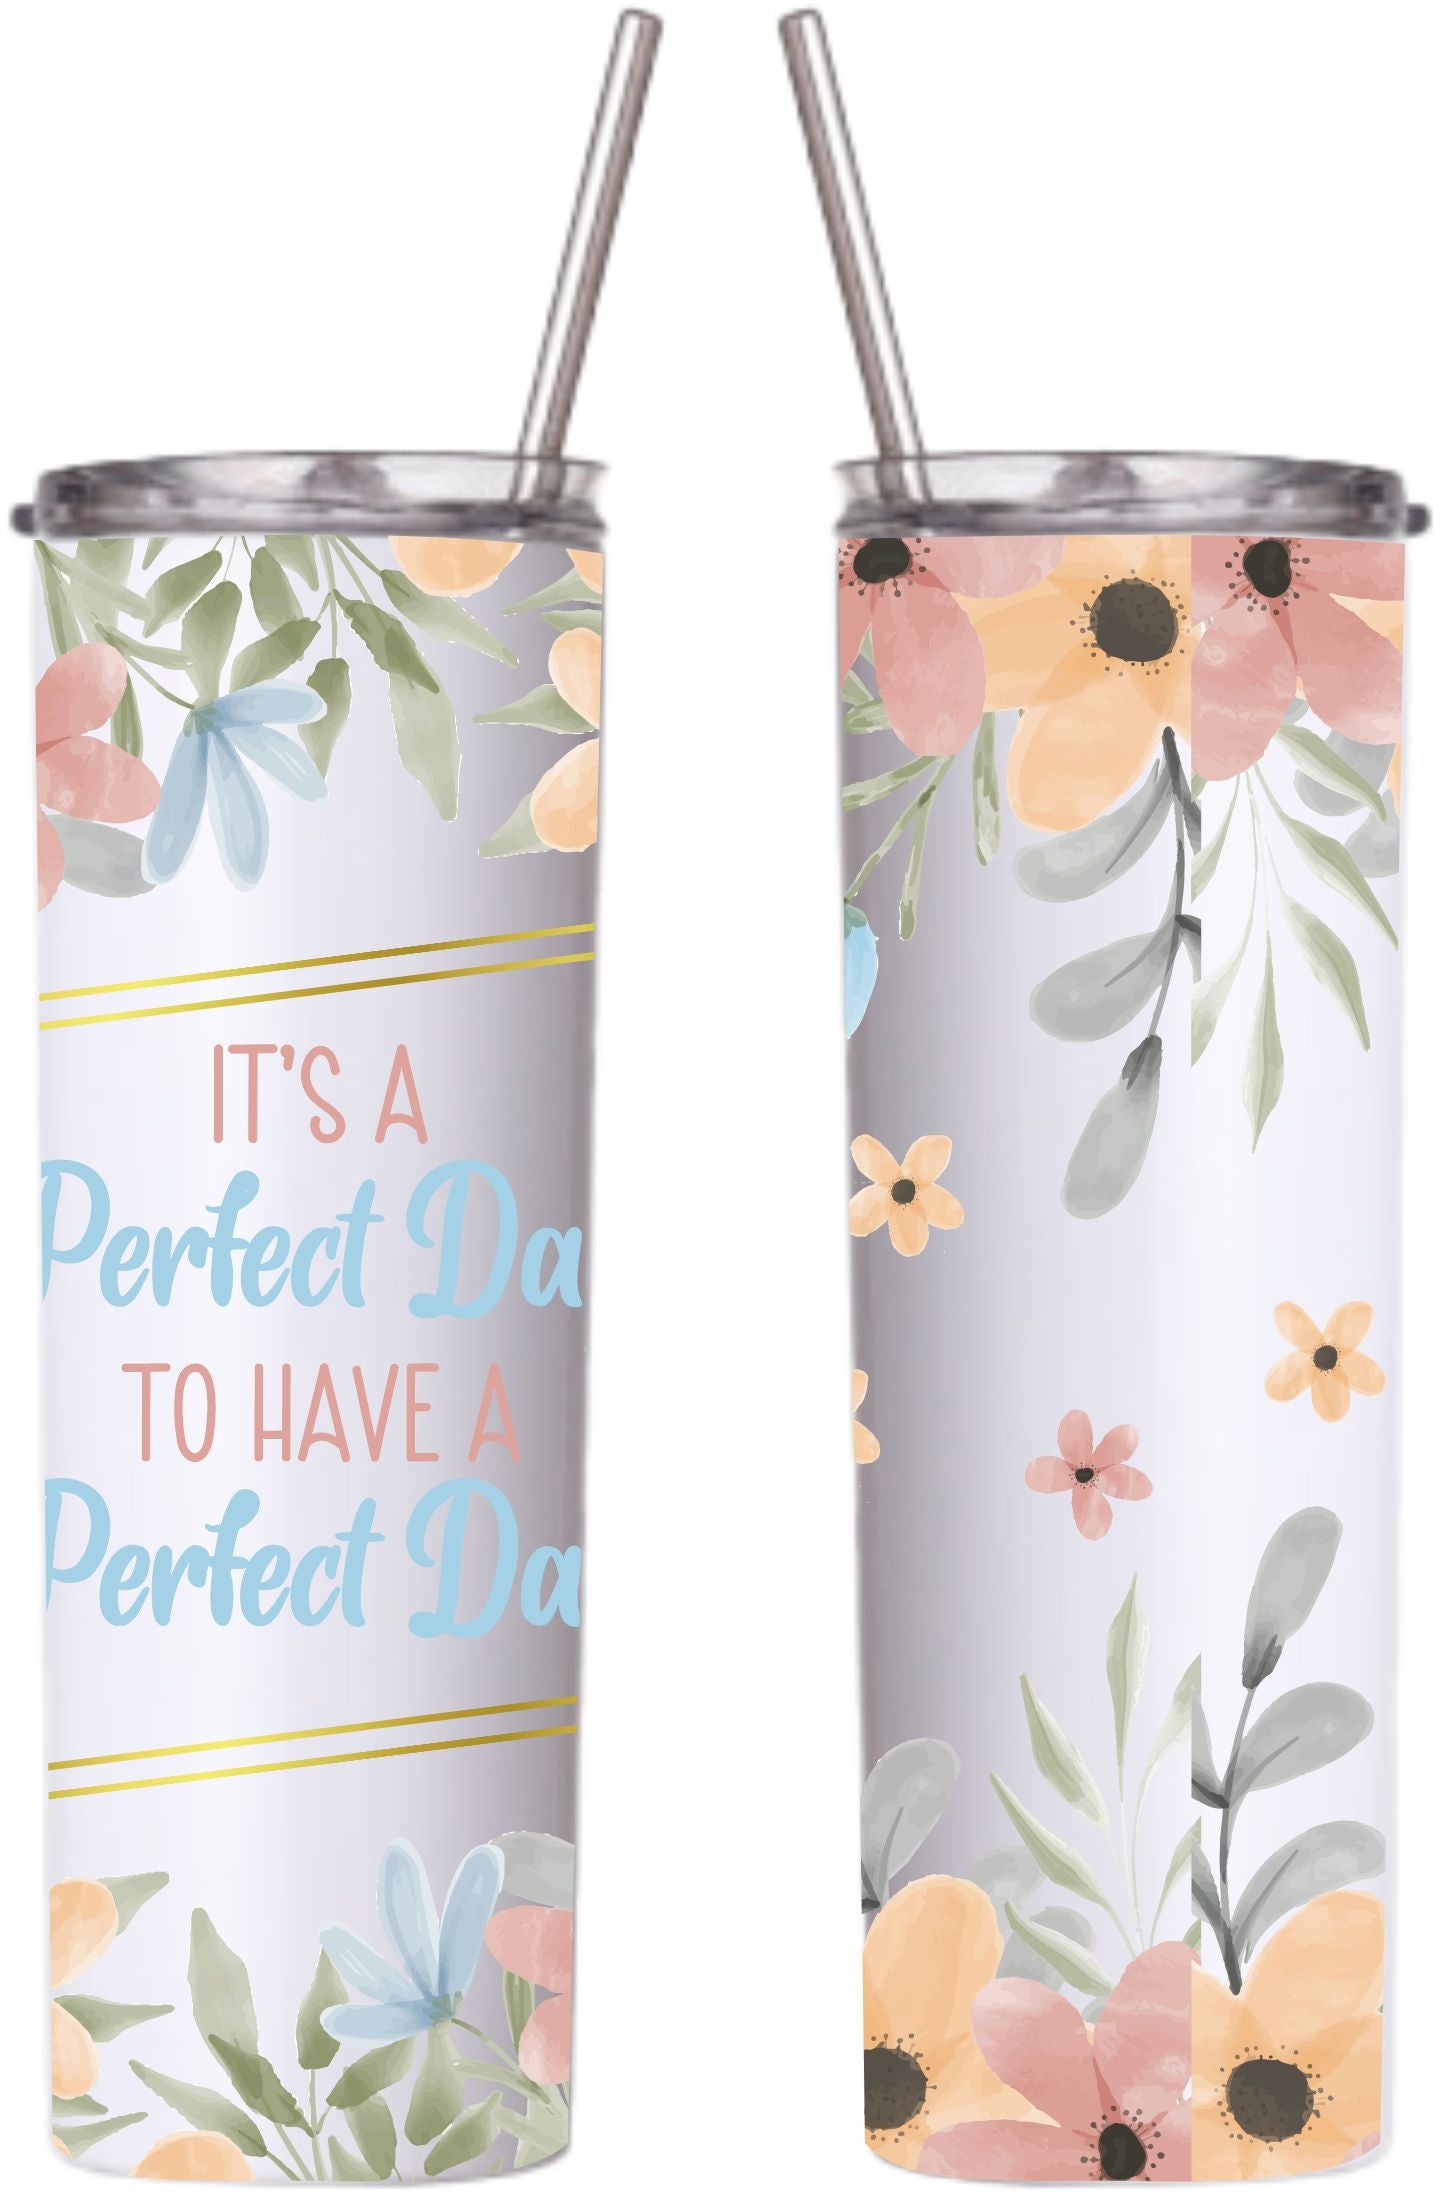 It's a Perfect Day to have a Perfect day Tumbler